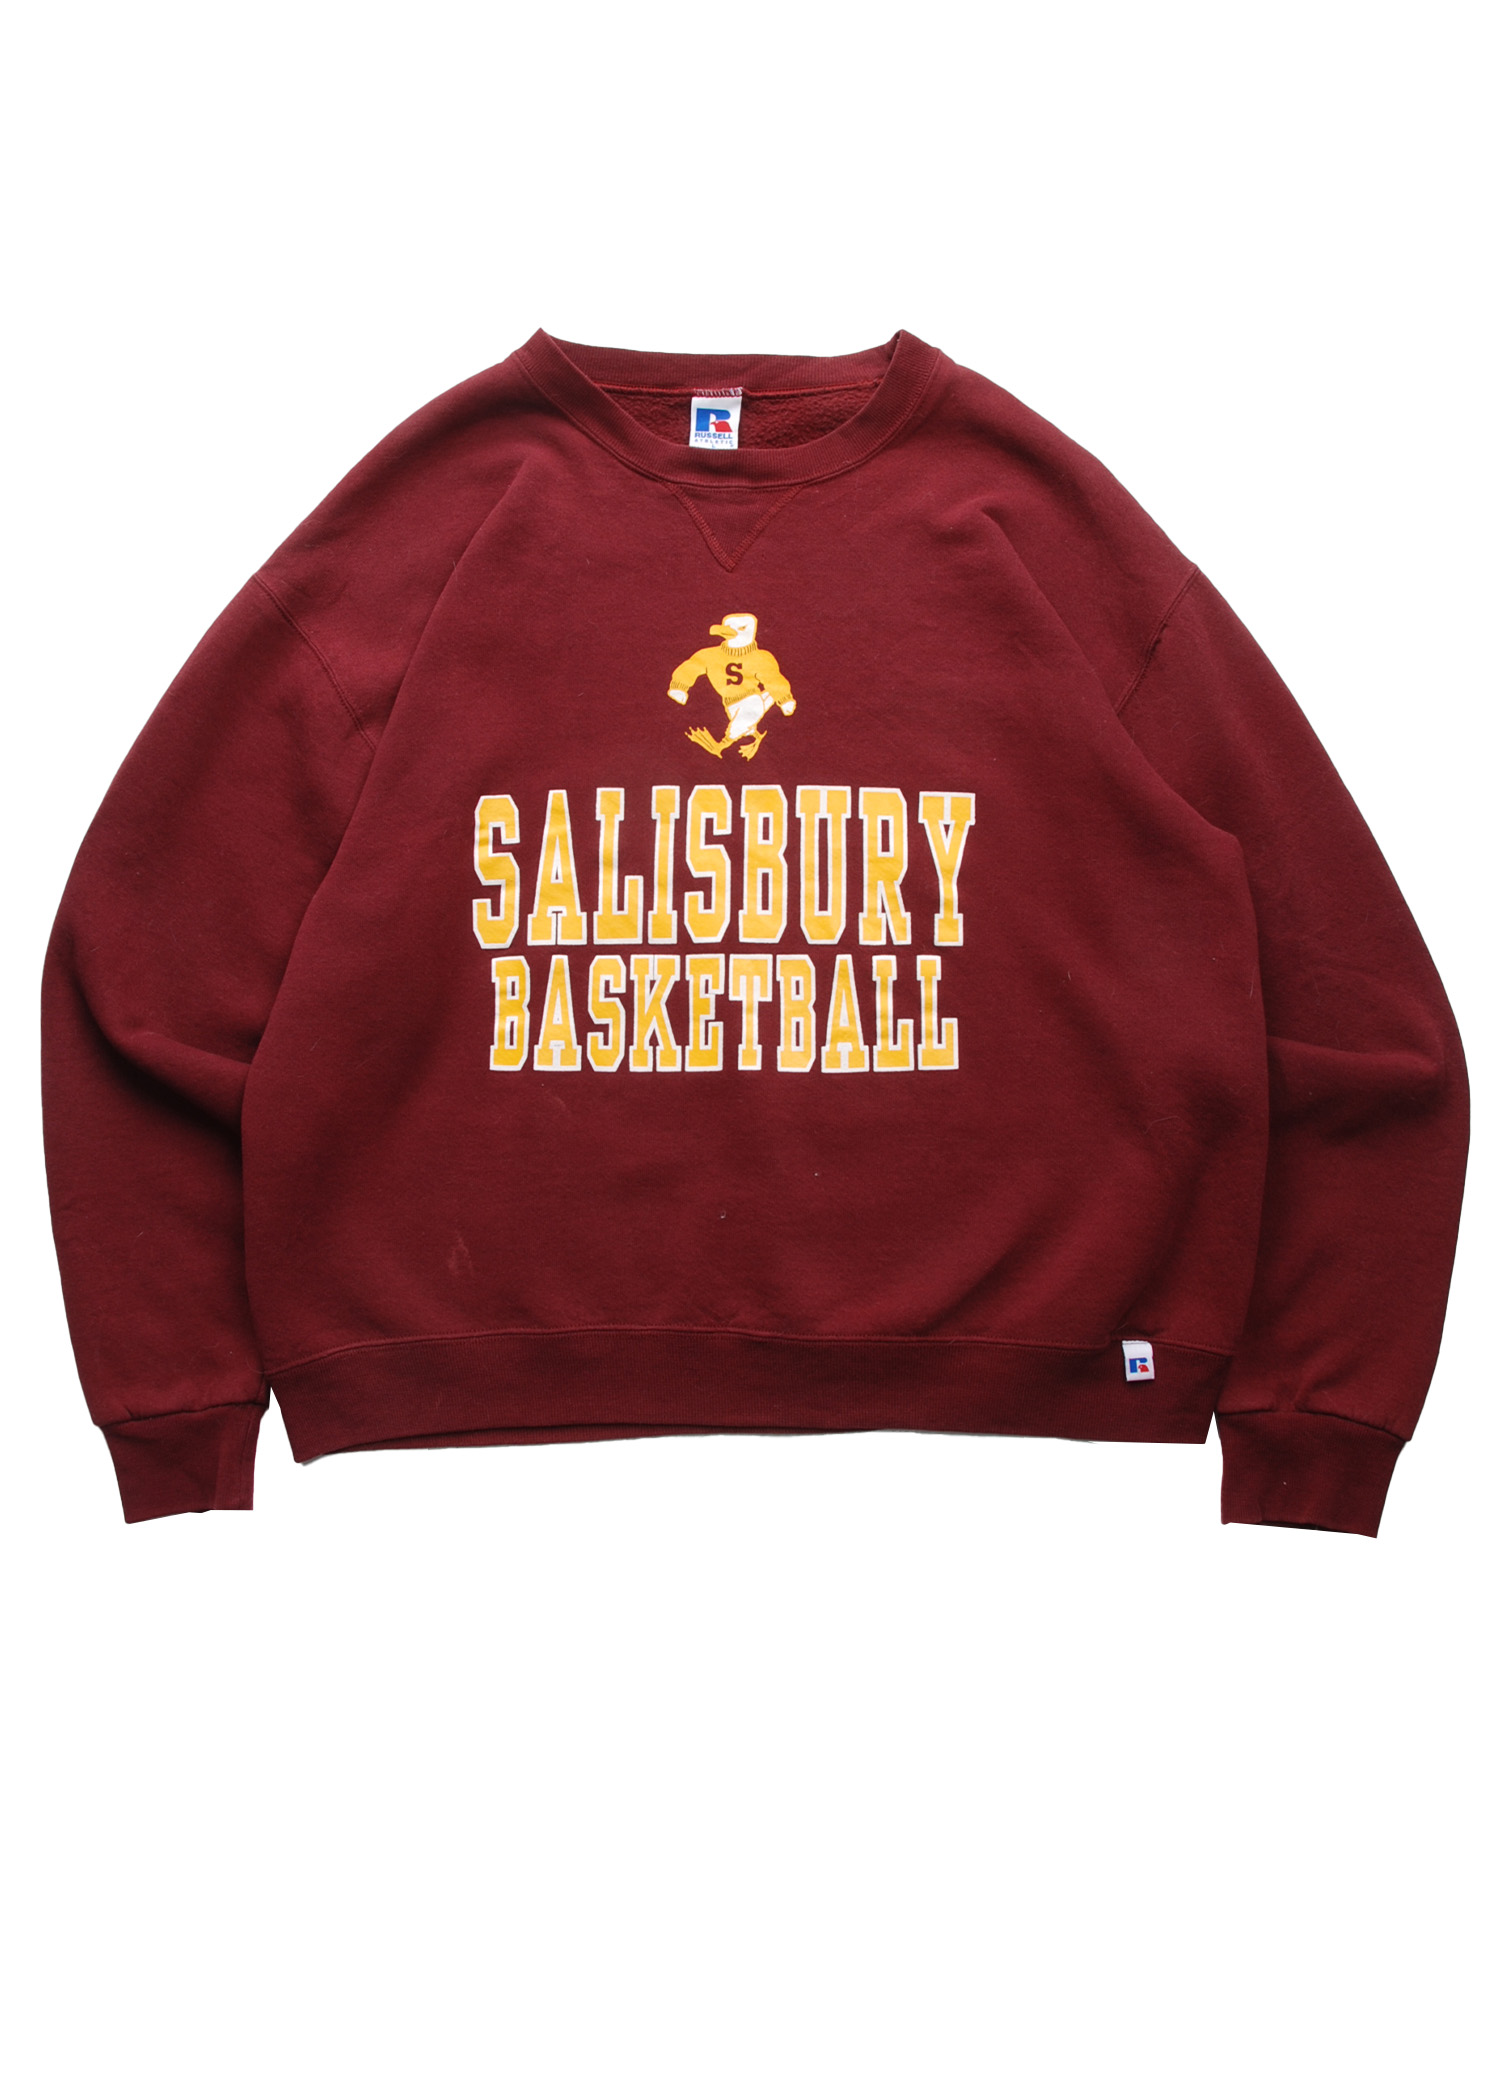 RUSSELL ATHLETIC collage sweatshirts